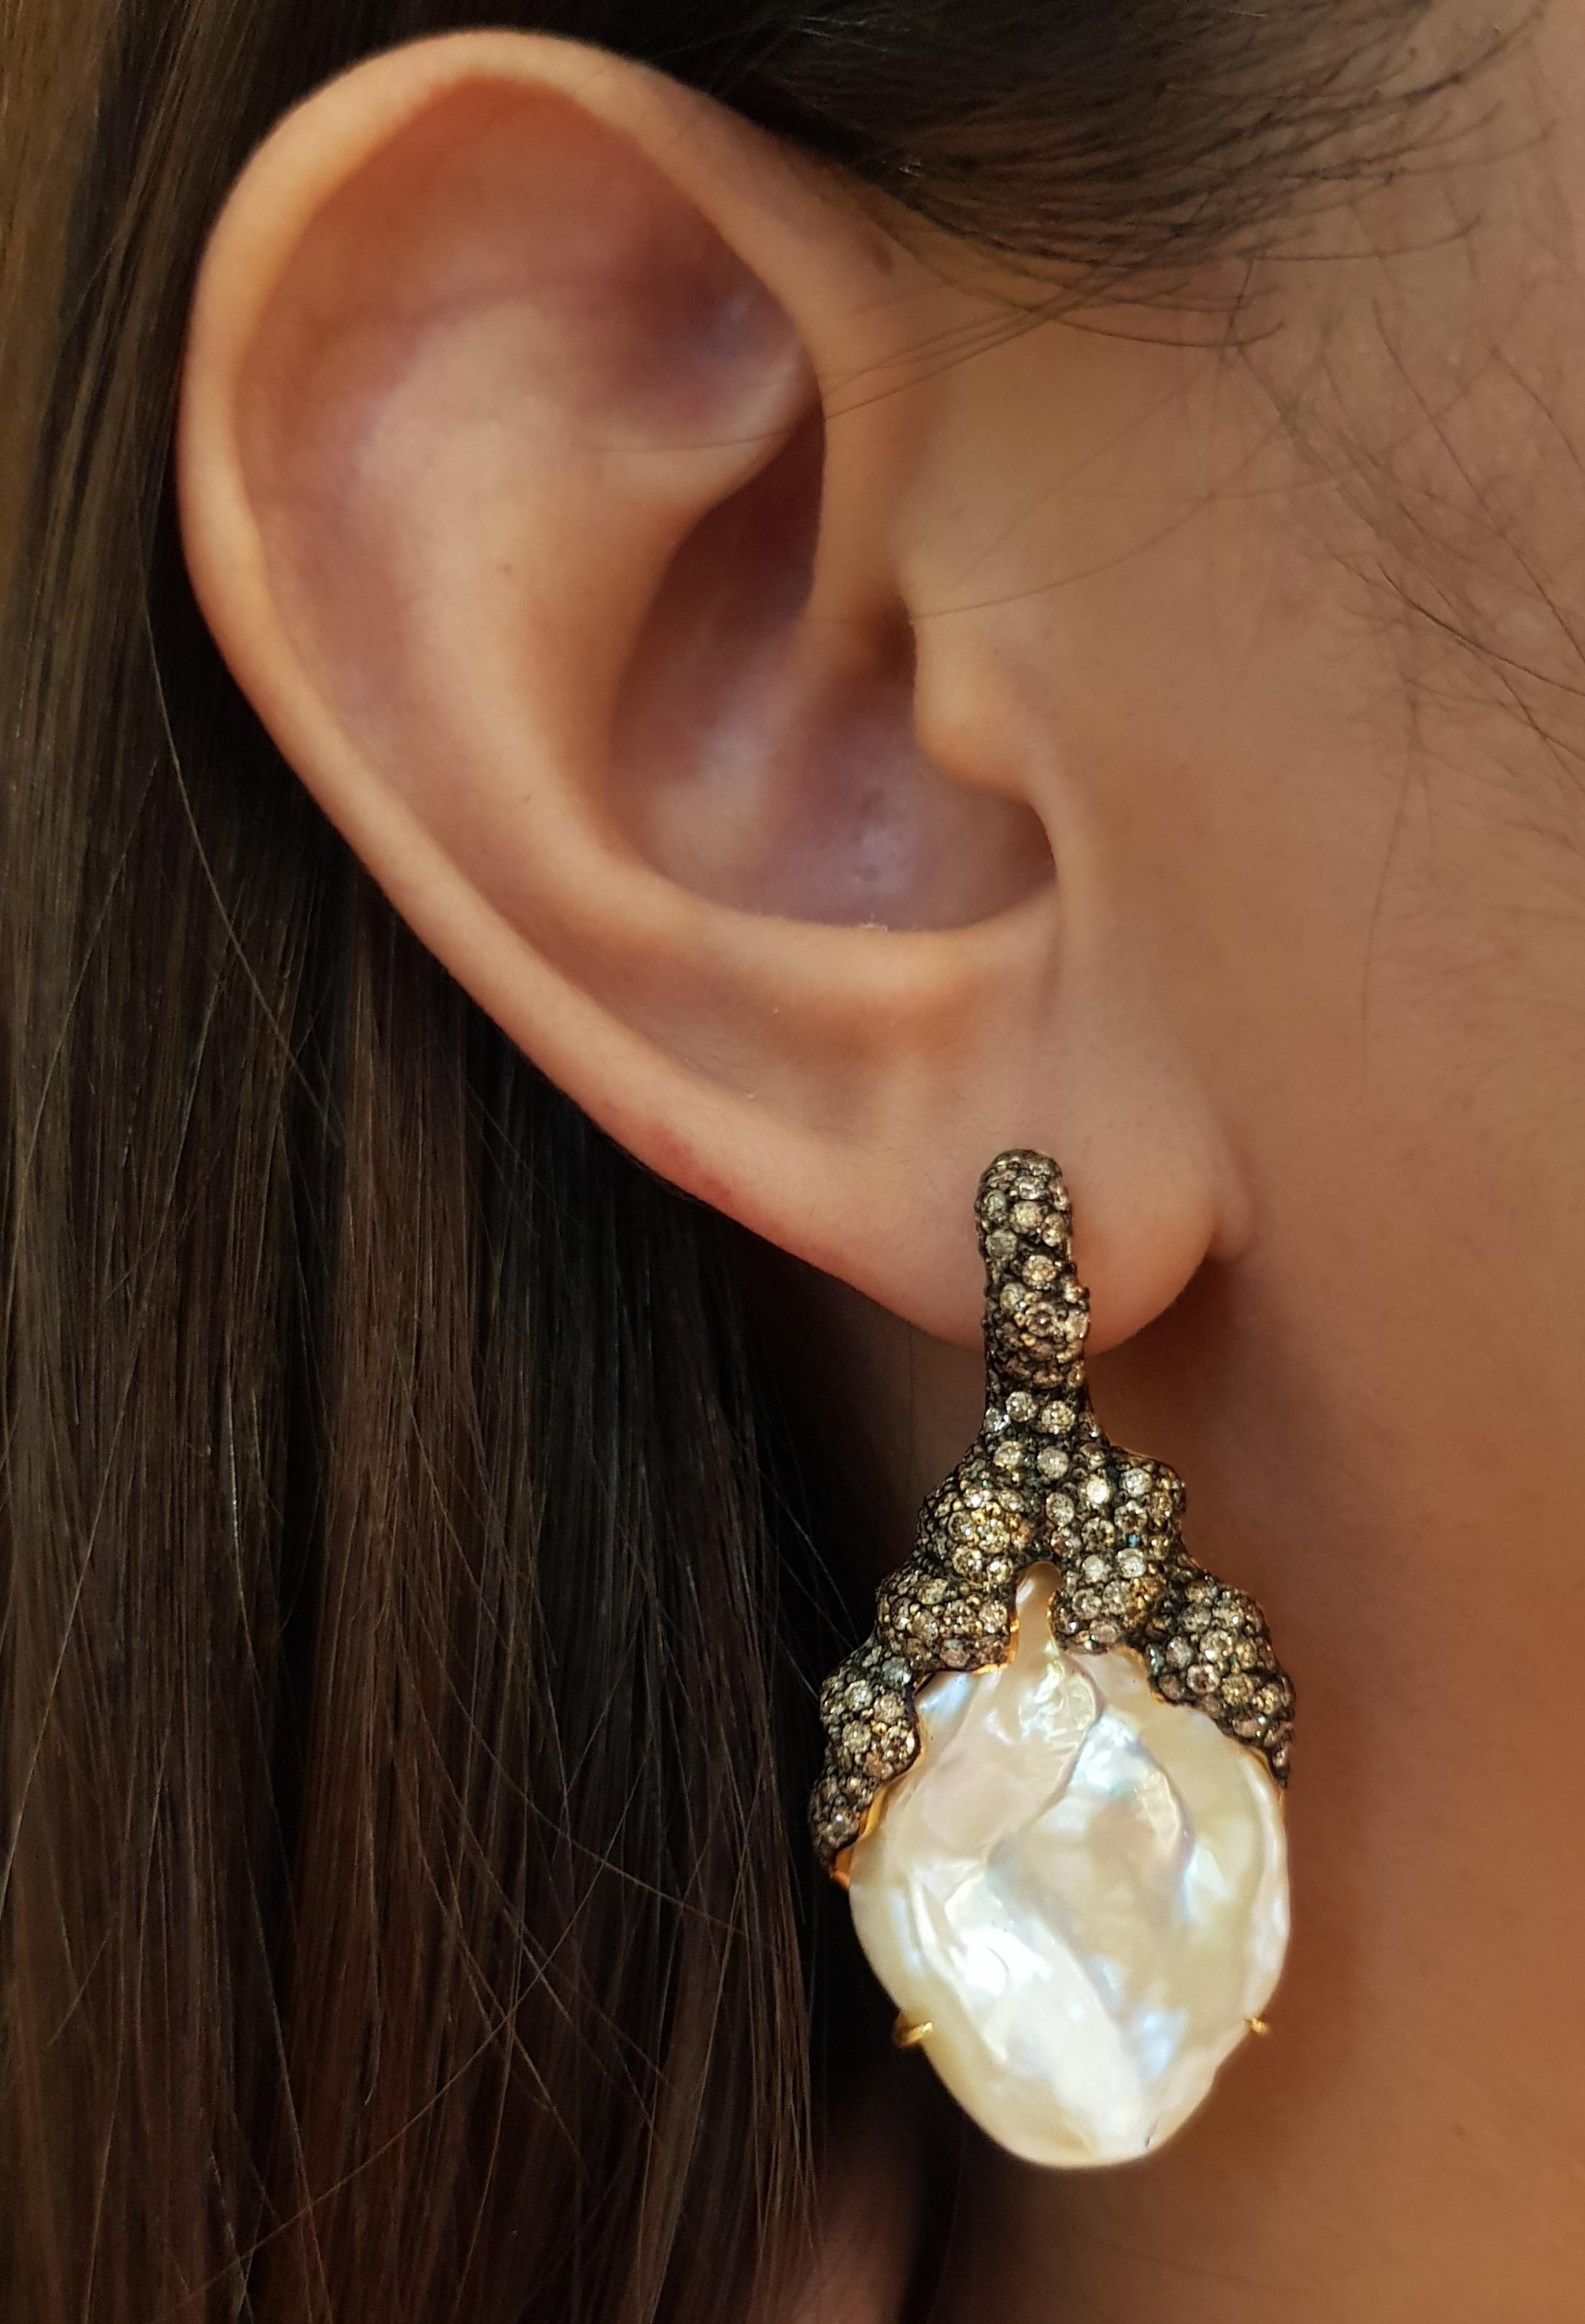 Pearl with Brown Diamond 3.02 carats Earrings set in 18 Karat Gold Settings

Width:  2.1 cm 
Length:  4.3  cm
Total Weight: 22.97 grams

FOUNDED BY AWARD-WINNING COUPLE, NUTTAPON (KENNY) & SHAR-LINN, KAVANT & SHARART IS A FINE JEWELRY BRAND TAILORED